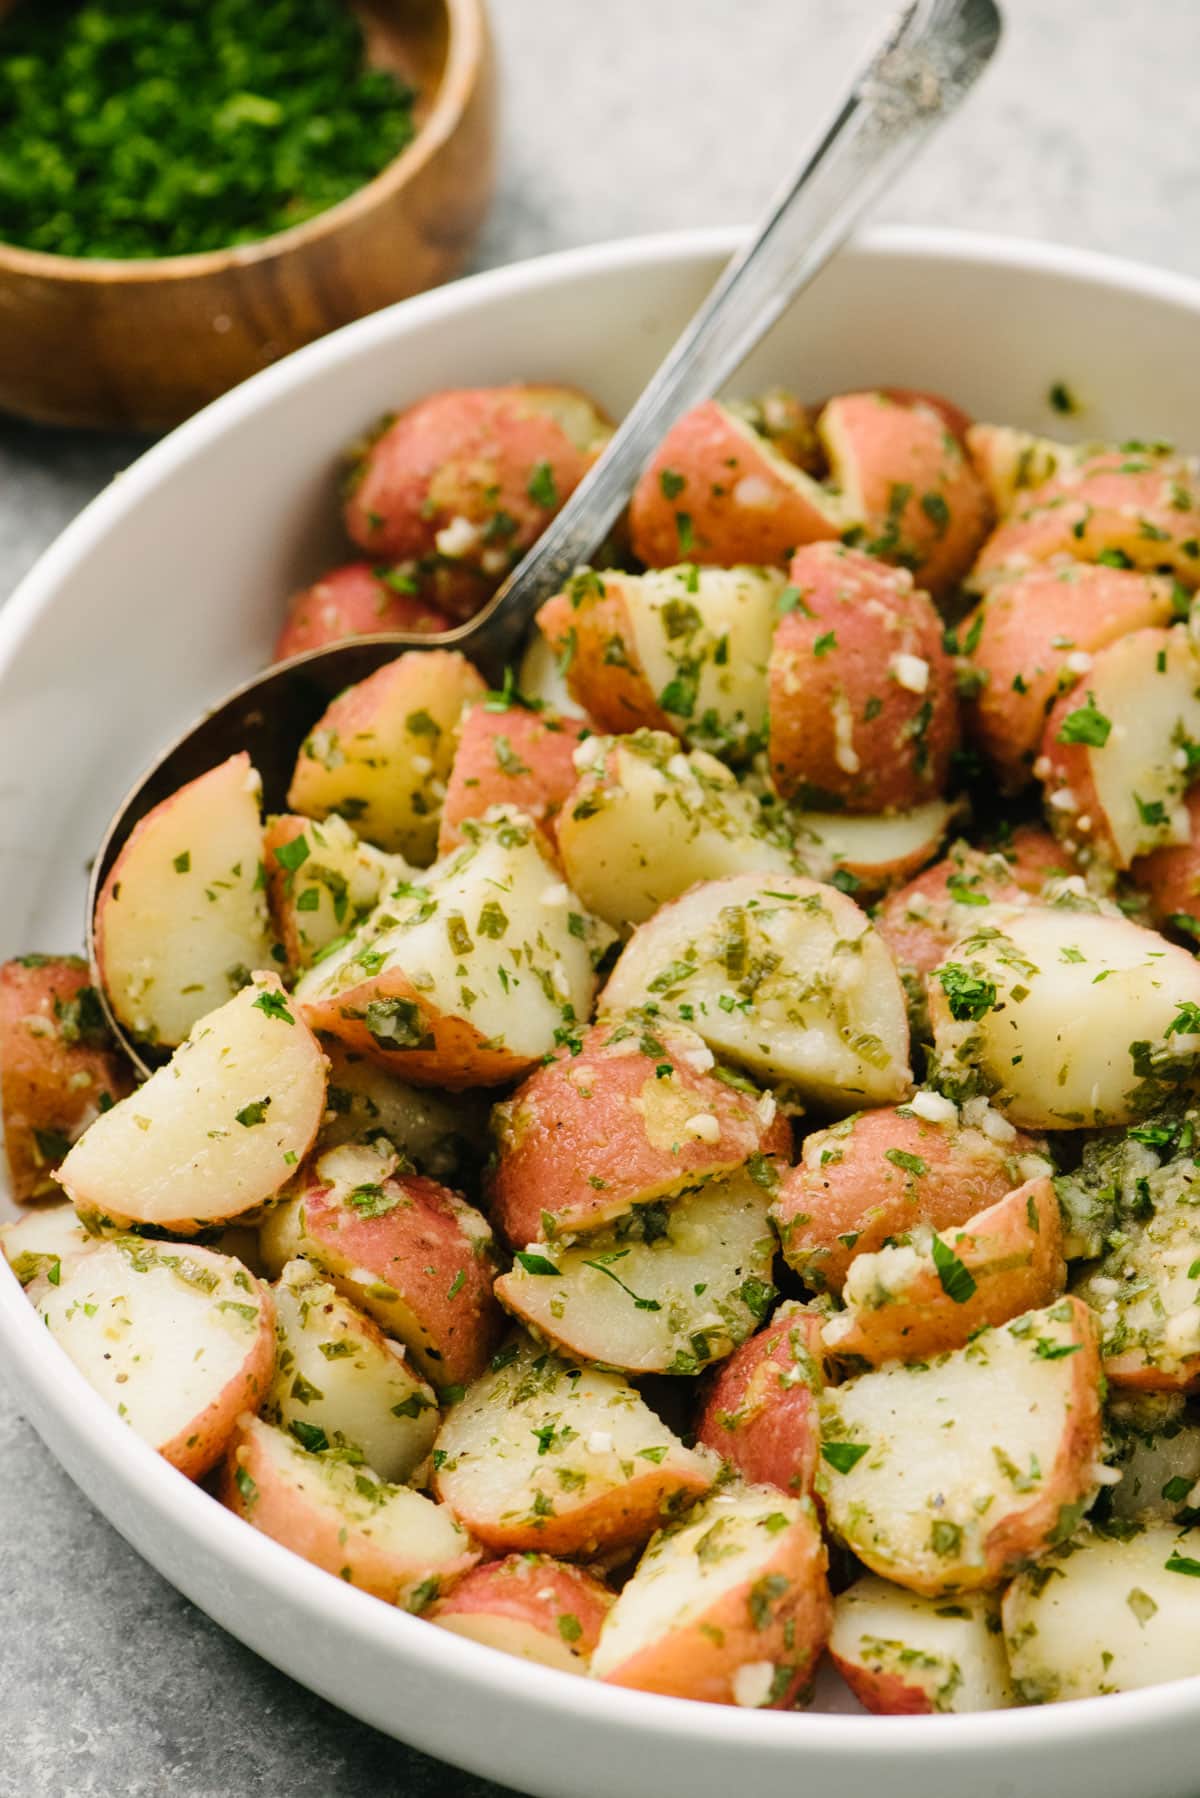 Side view, Italian potato salad with vinaigrette in a large white serving bowl with a small wood bowl of fresh minced herbs in the background.